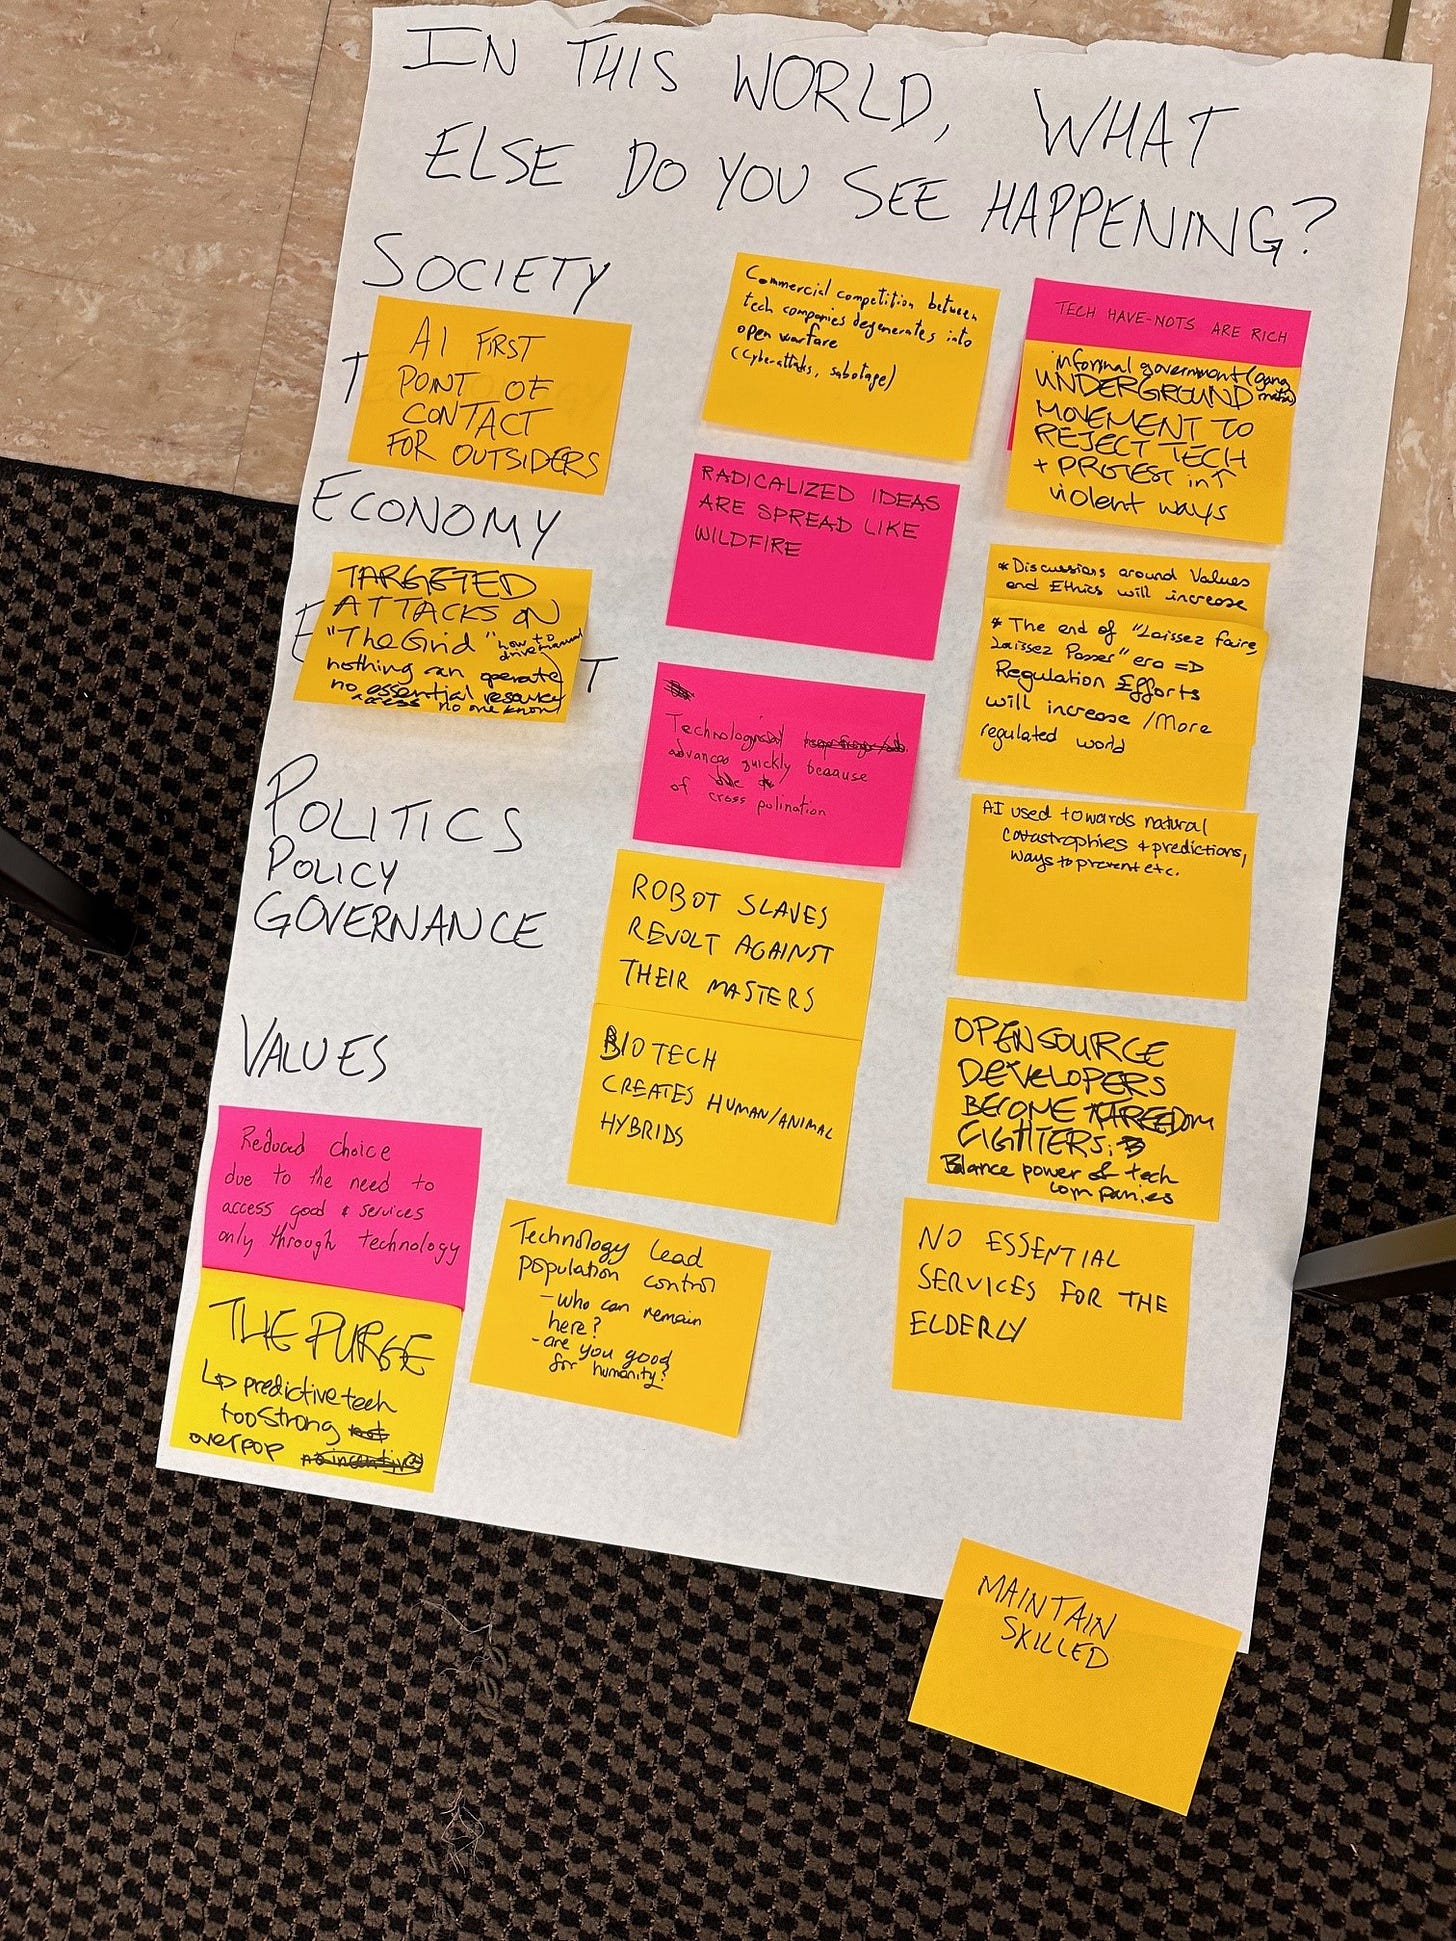 Poster on the floor of a conference room covered in sticky notes with ideas about potential futures.